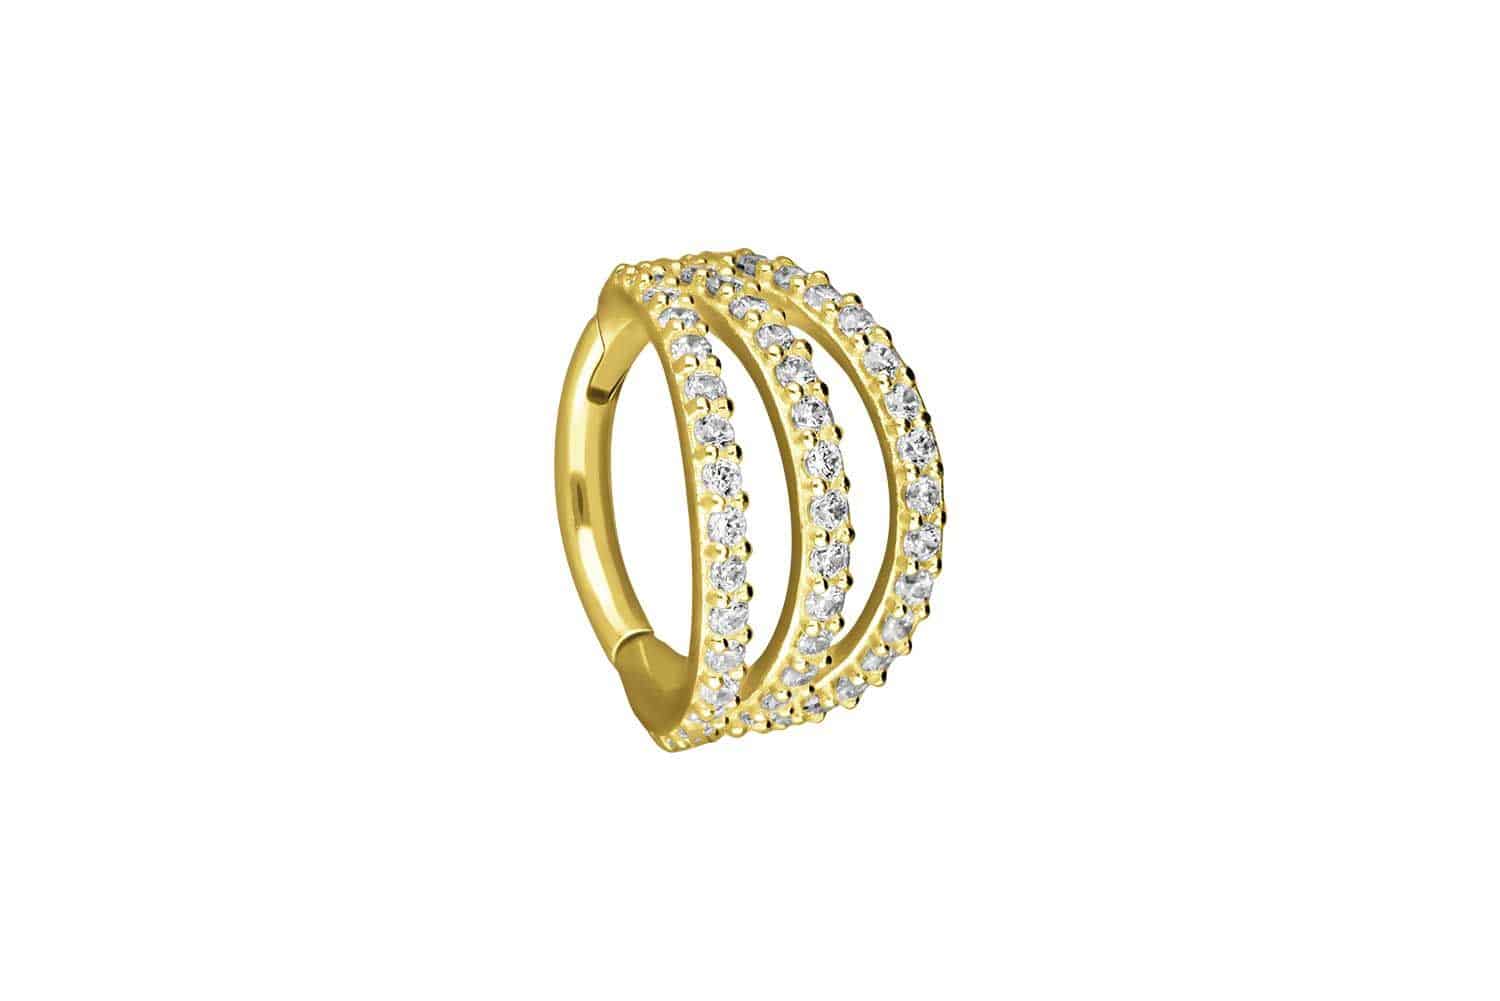 18 carat gold segment ring clicker 3 RINGS + SETTED CRYSTALS